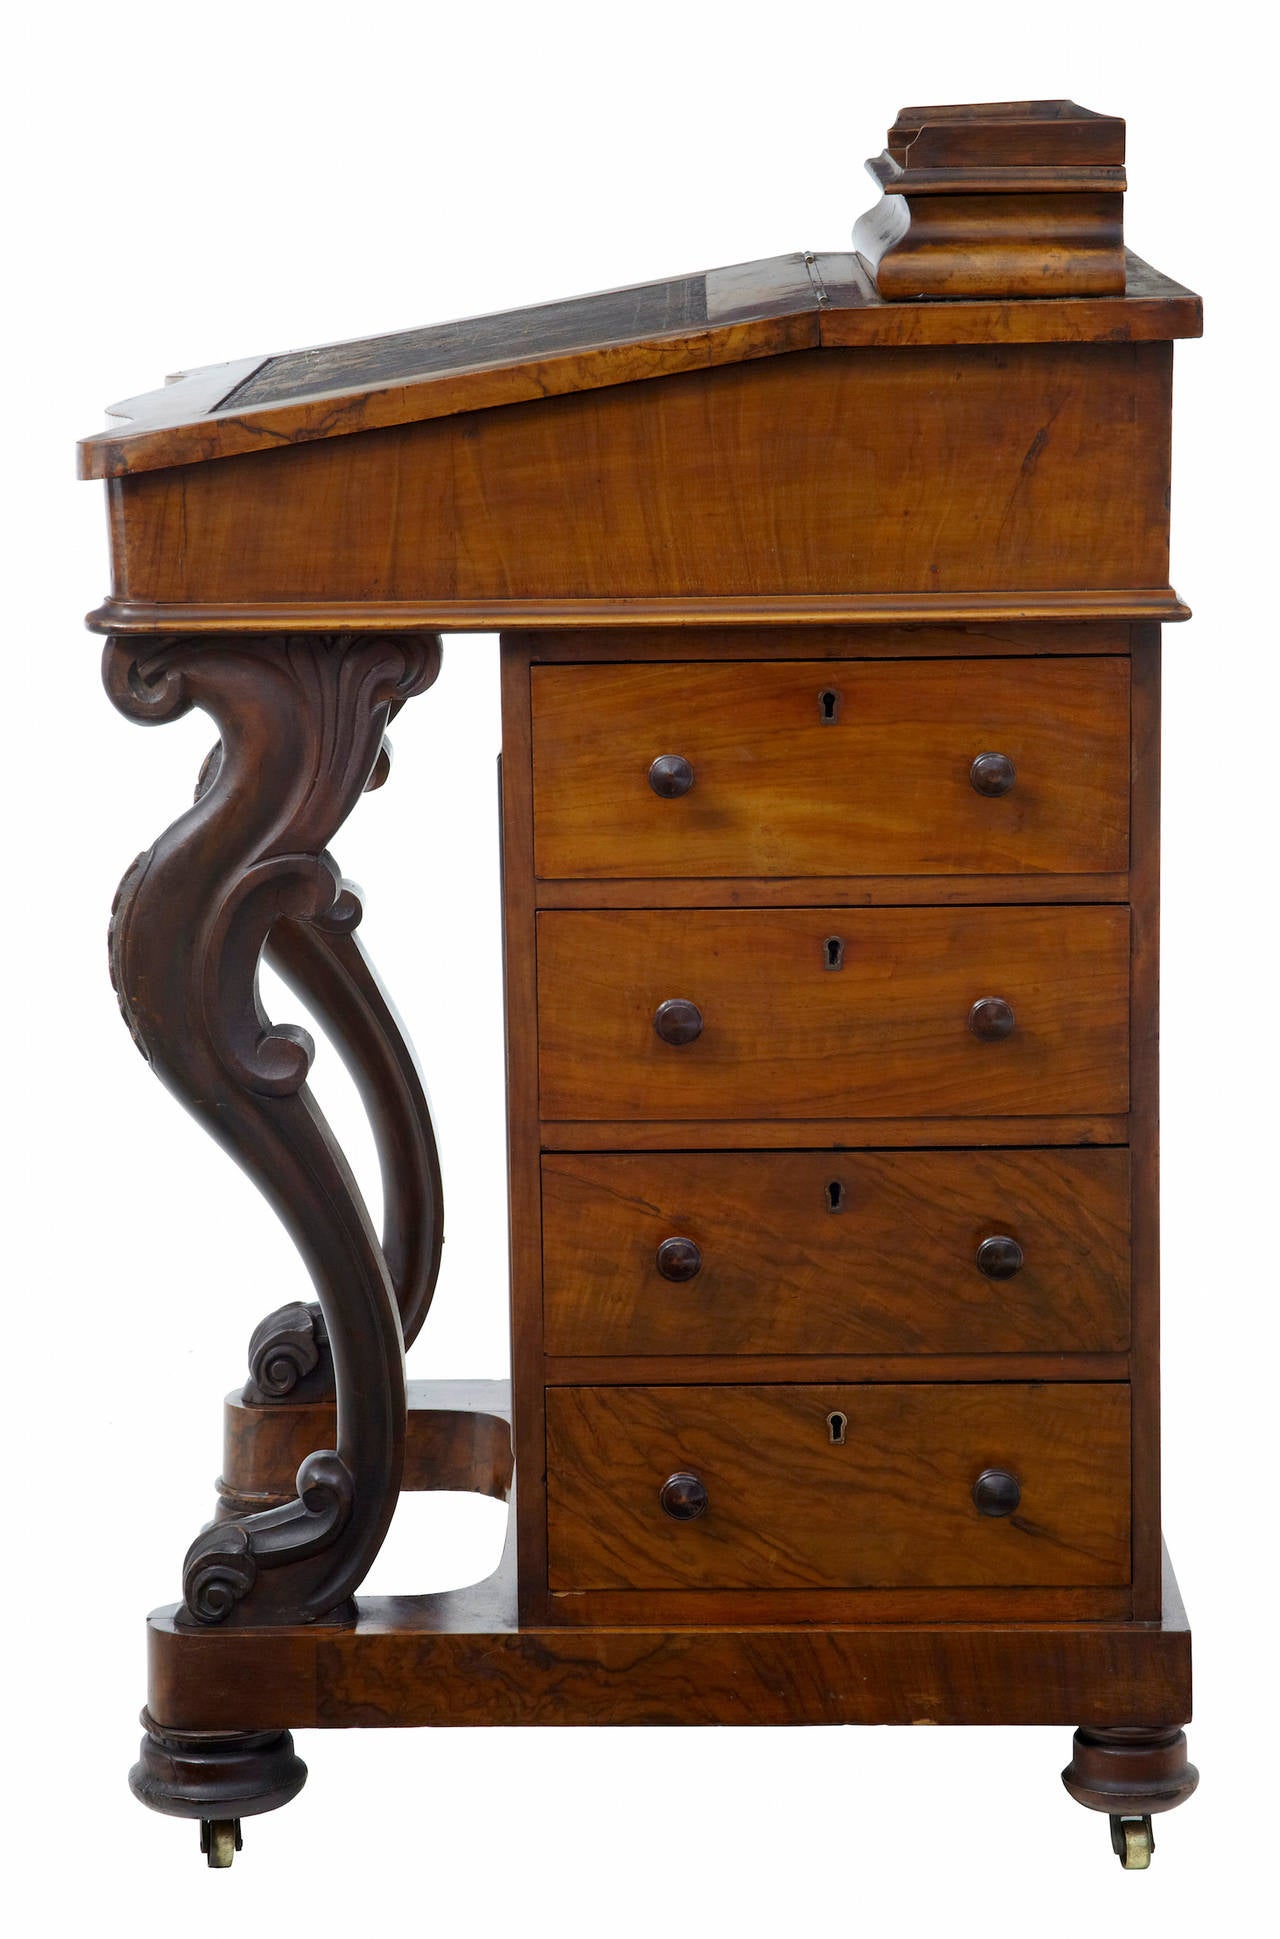 Good quality davenport in original condition, circa 1870. Enclosed pen tray above the writing slope which still has the original leather in place. Slope opens to reveal a satinwood interior containing a single drawer and two pigeon holes. Four full